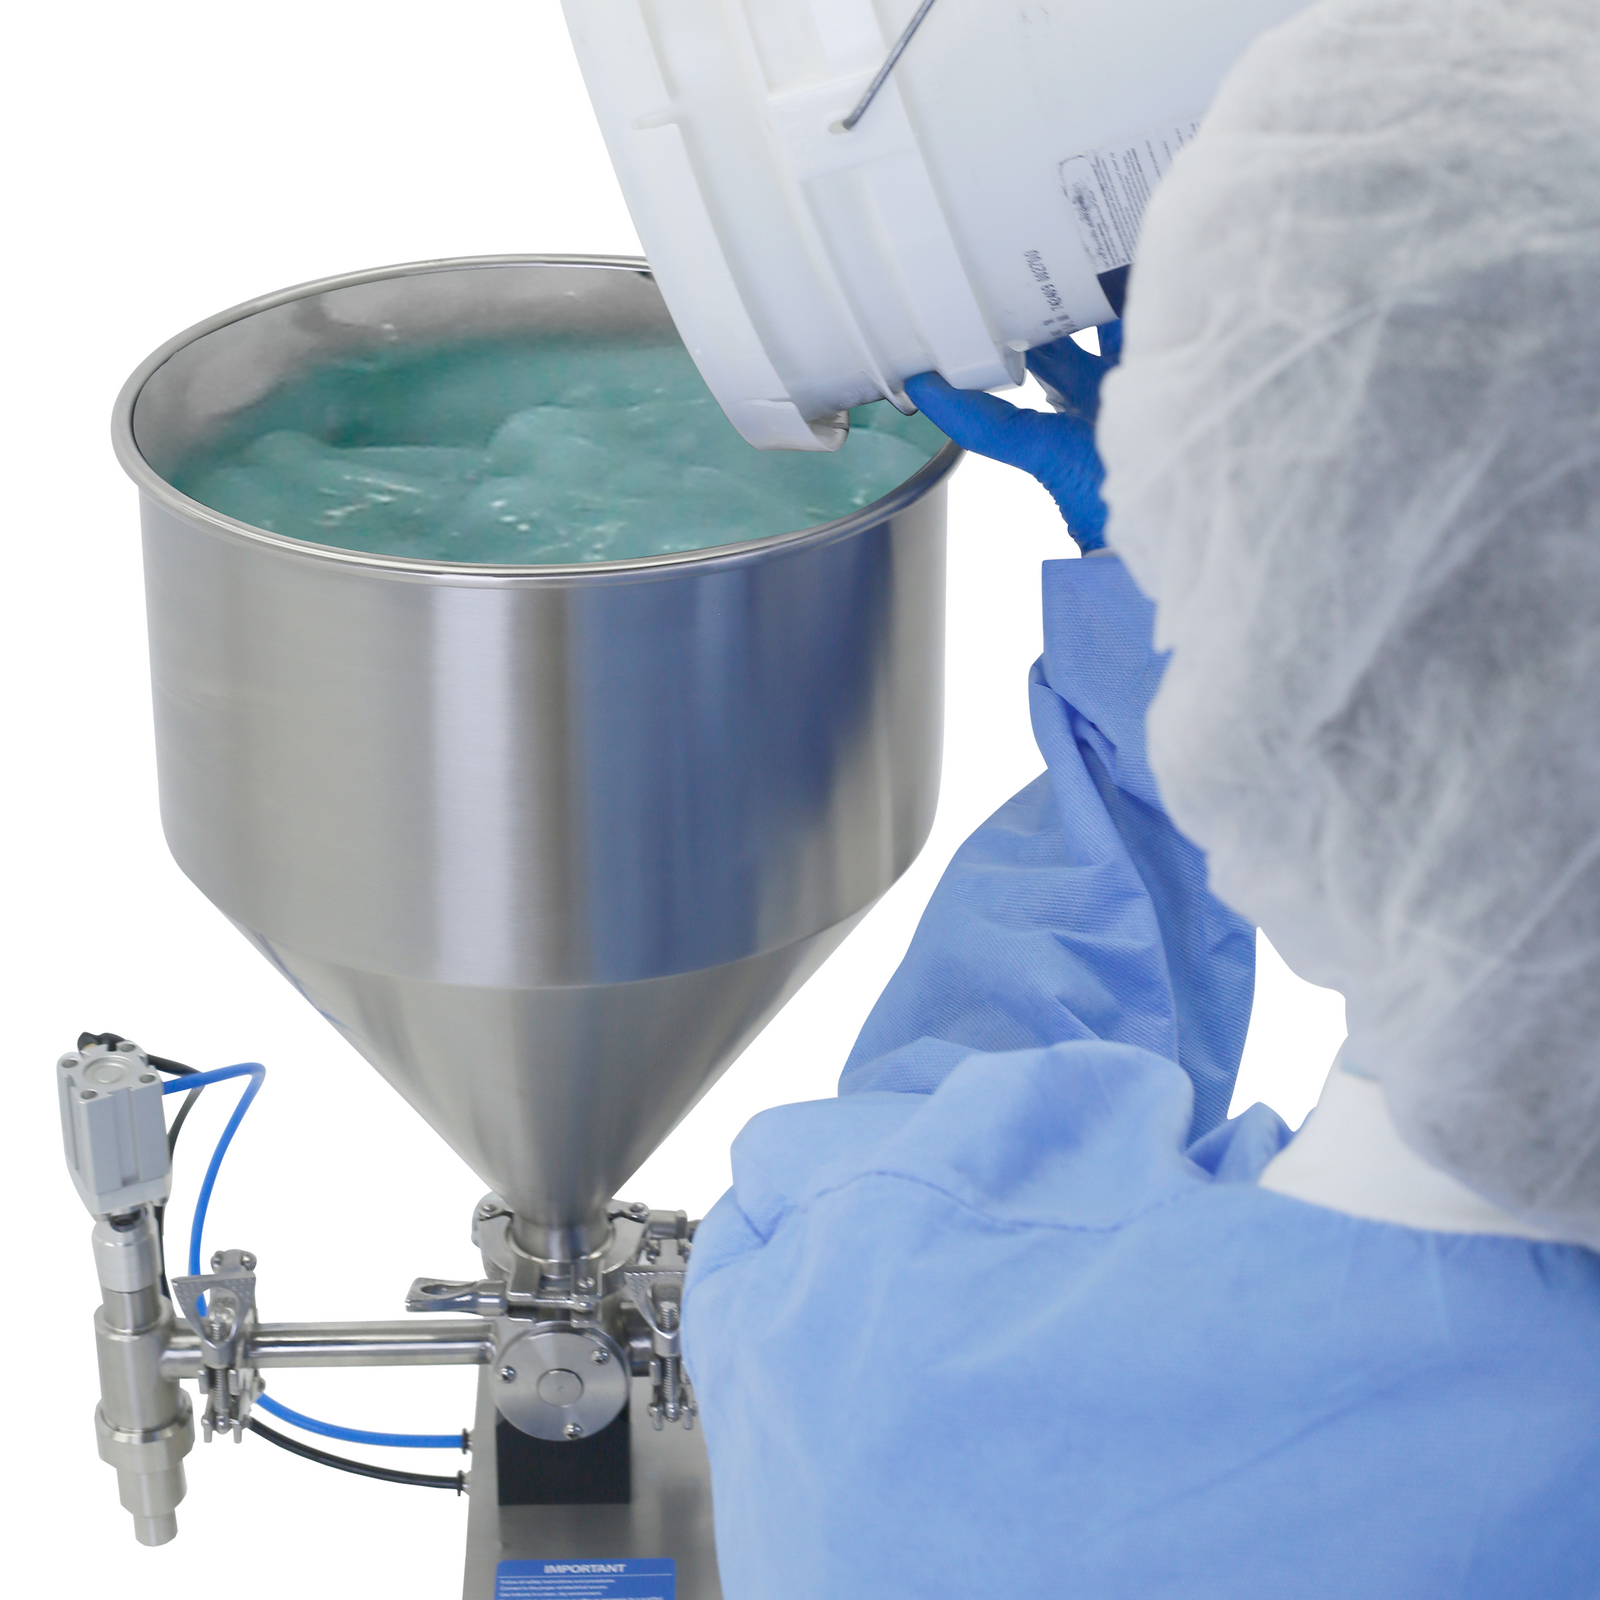 Close up of a person wearing disposable clothing and gloves standing beside a Piston filler. He is dispensing a green gel into the hopper of a table top JORESTECH Piston filler for paste